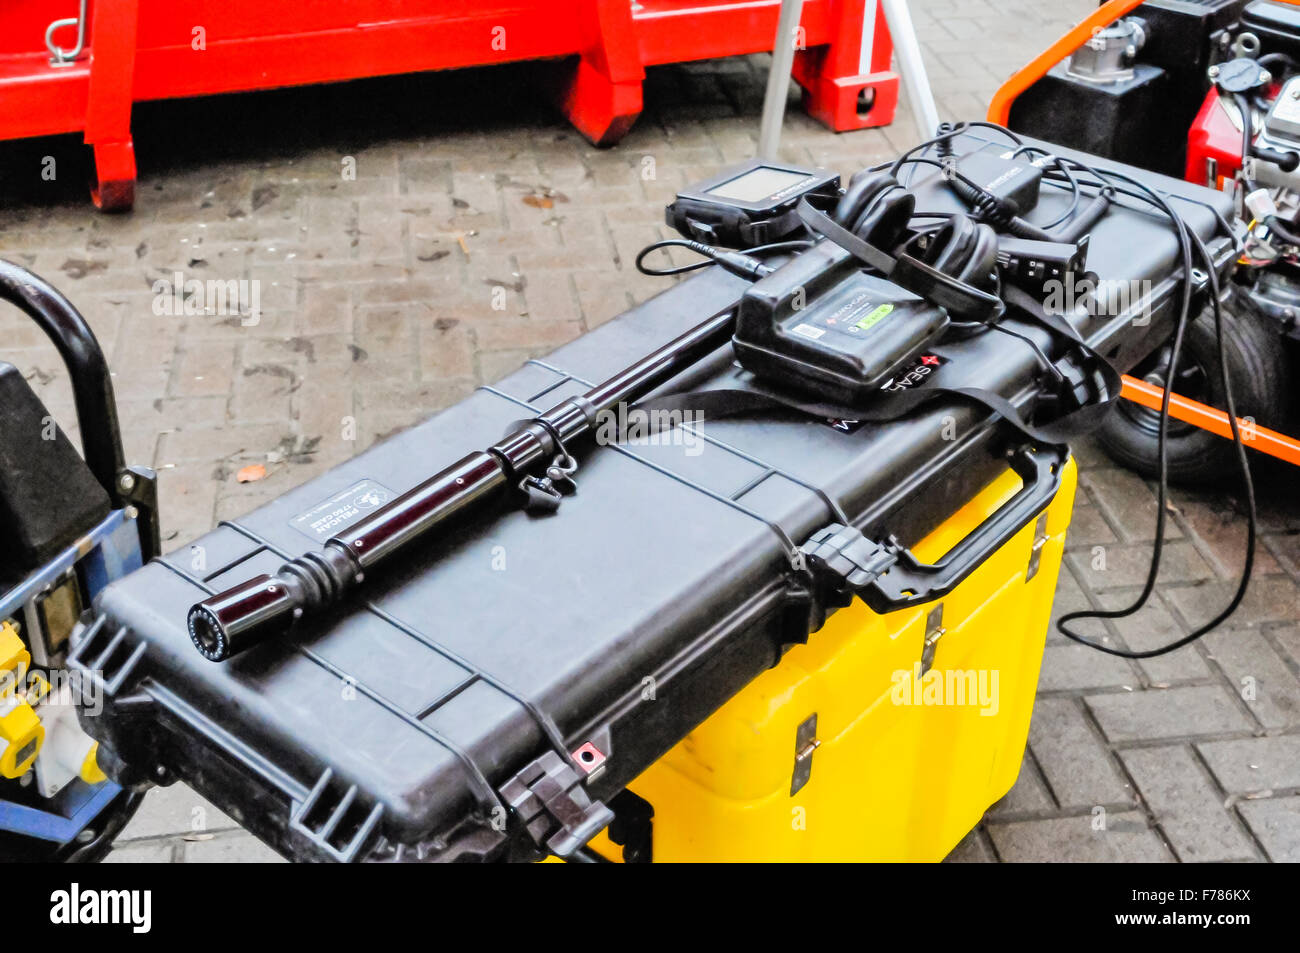 Northern Ireland. 26th November, 2015. A SearchCam flexible camera used by rescue teams to search inaccessible voids in buildings during rescue operations. Credit:  Stephen Barnes/Alamy Live News Stock Photo